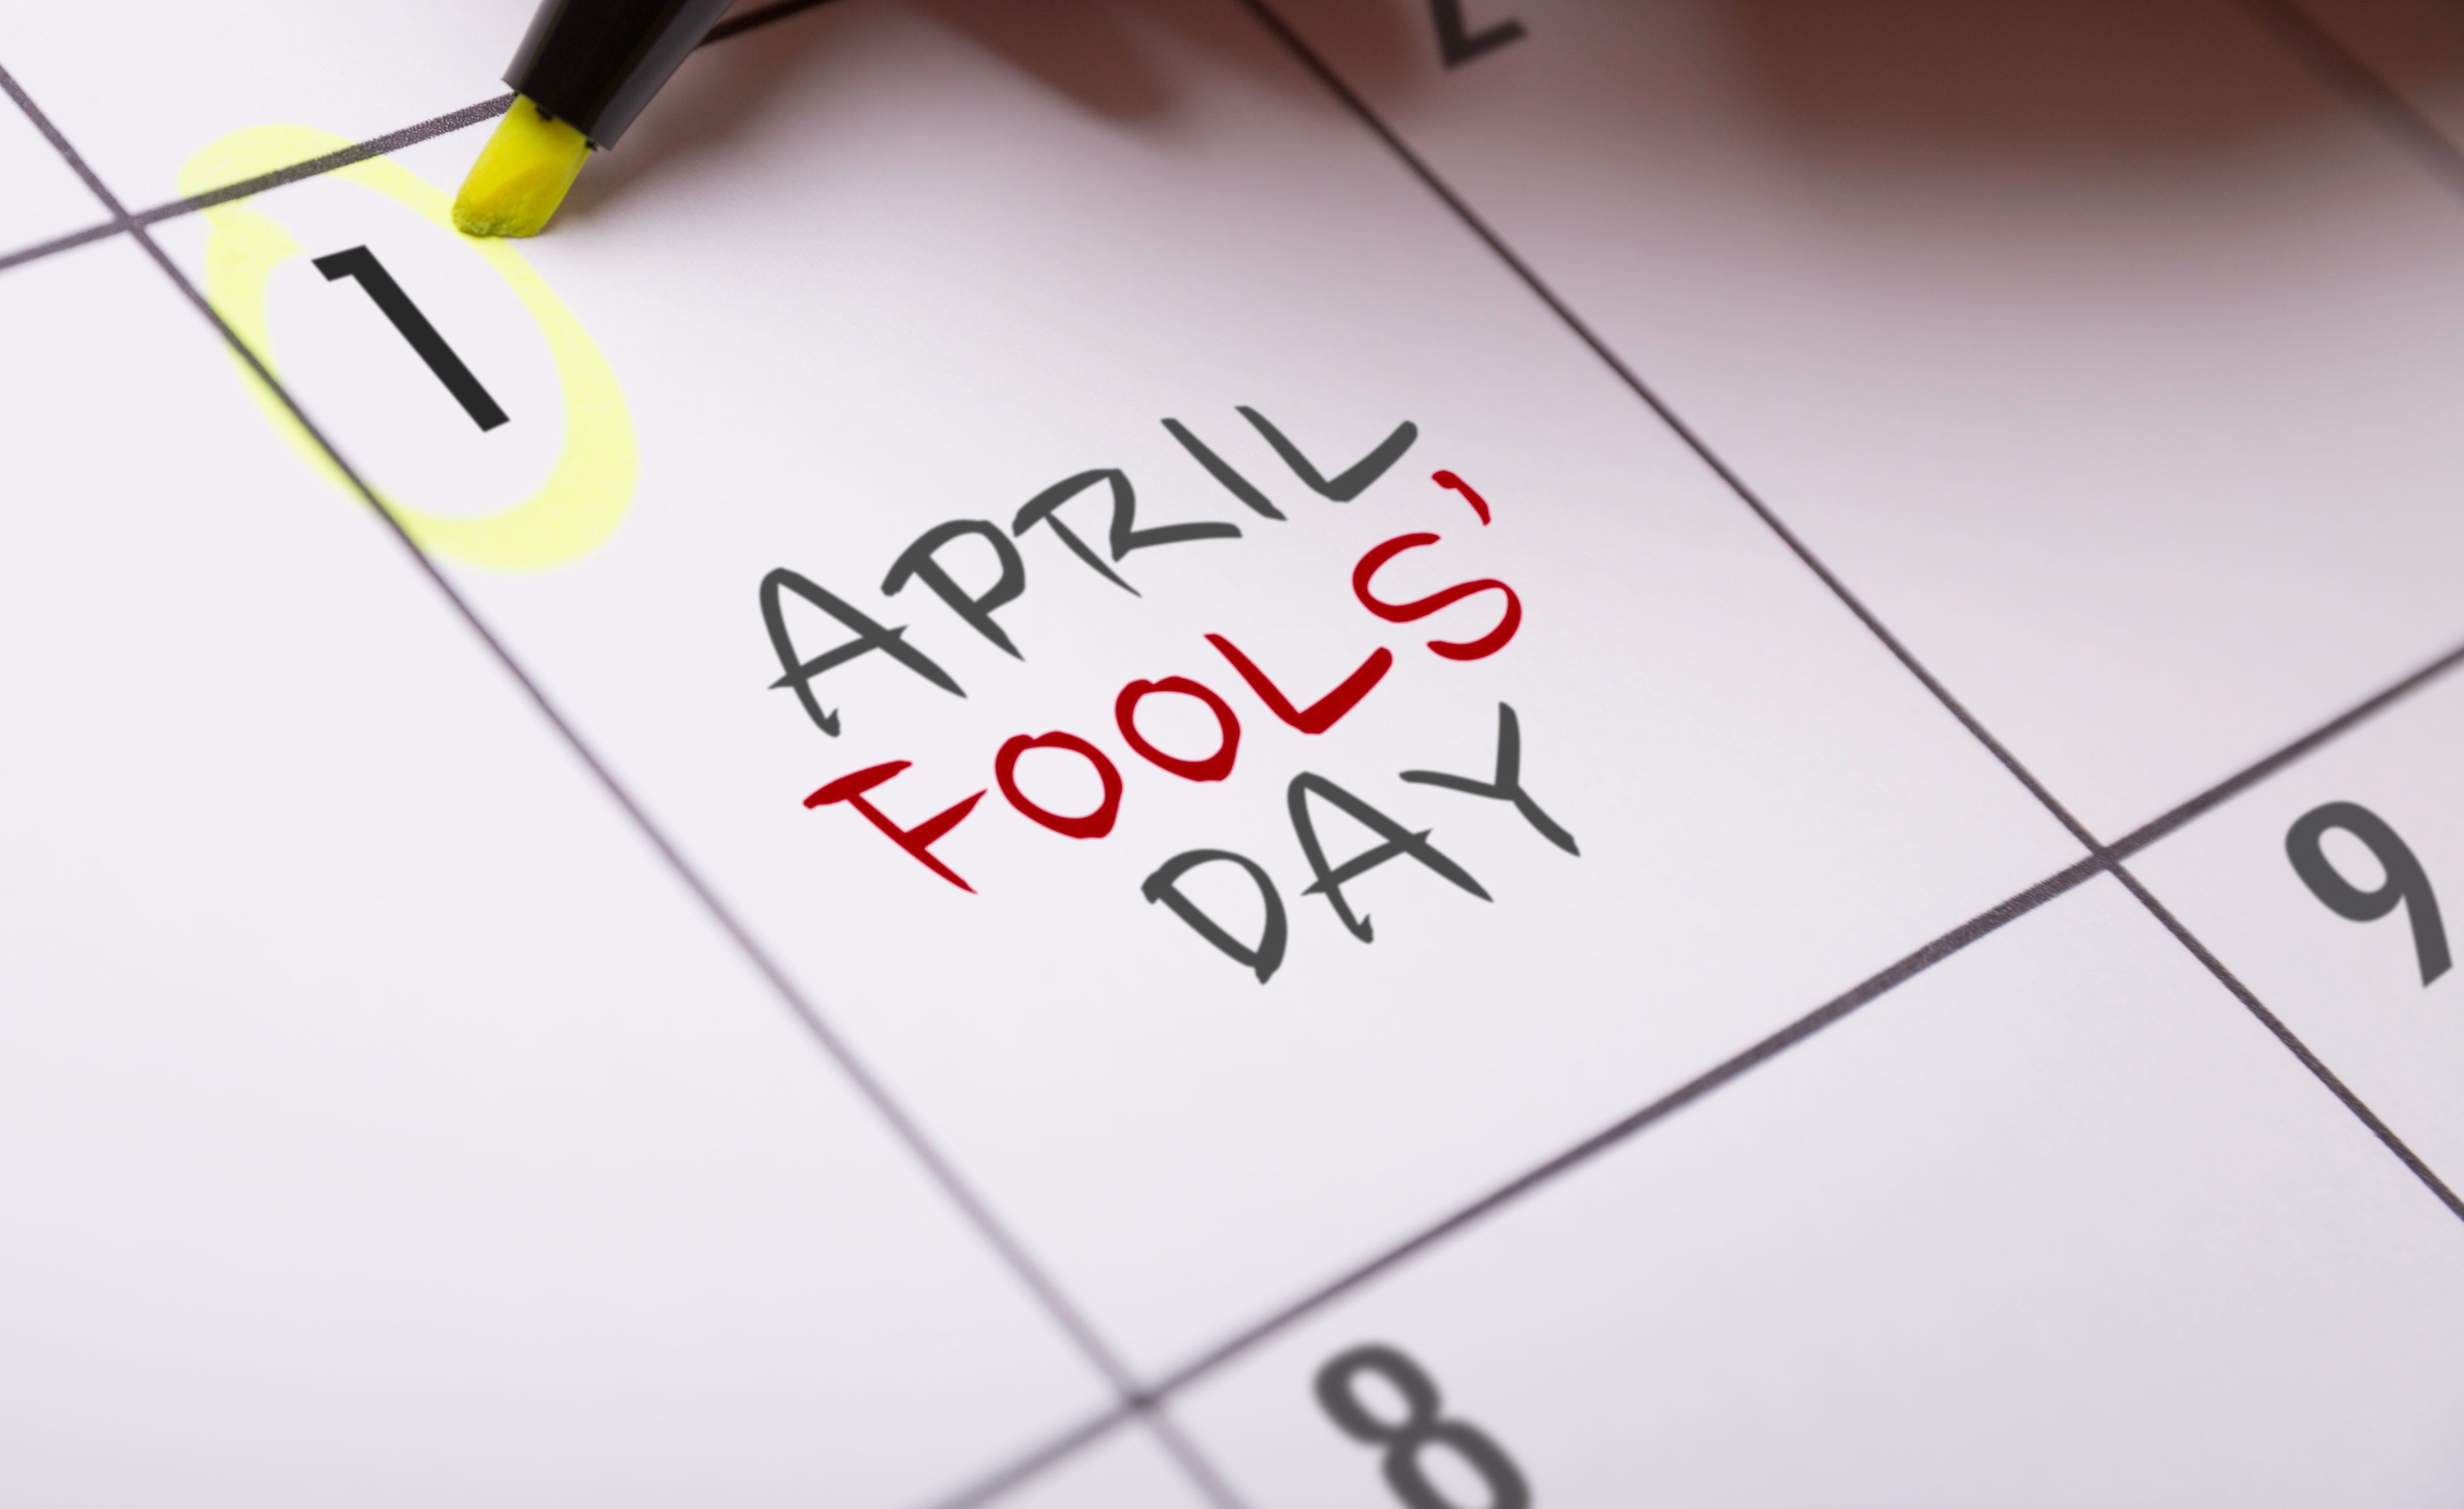 April Fools' Day: Origin, History, Meaning